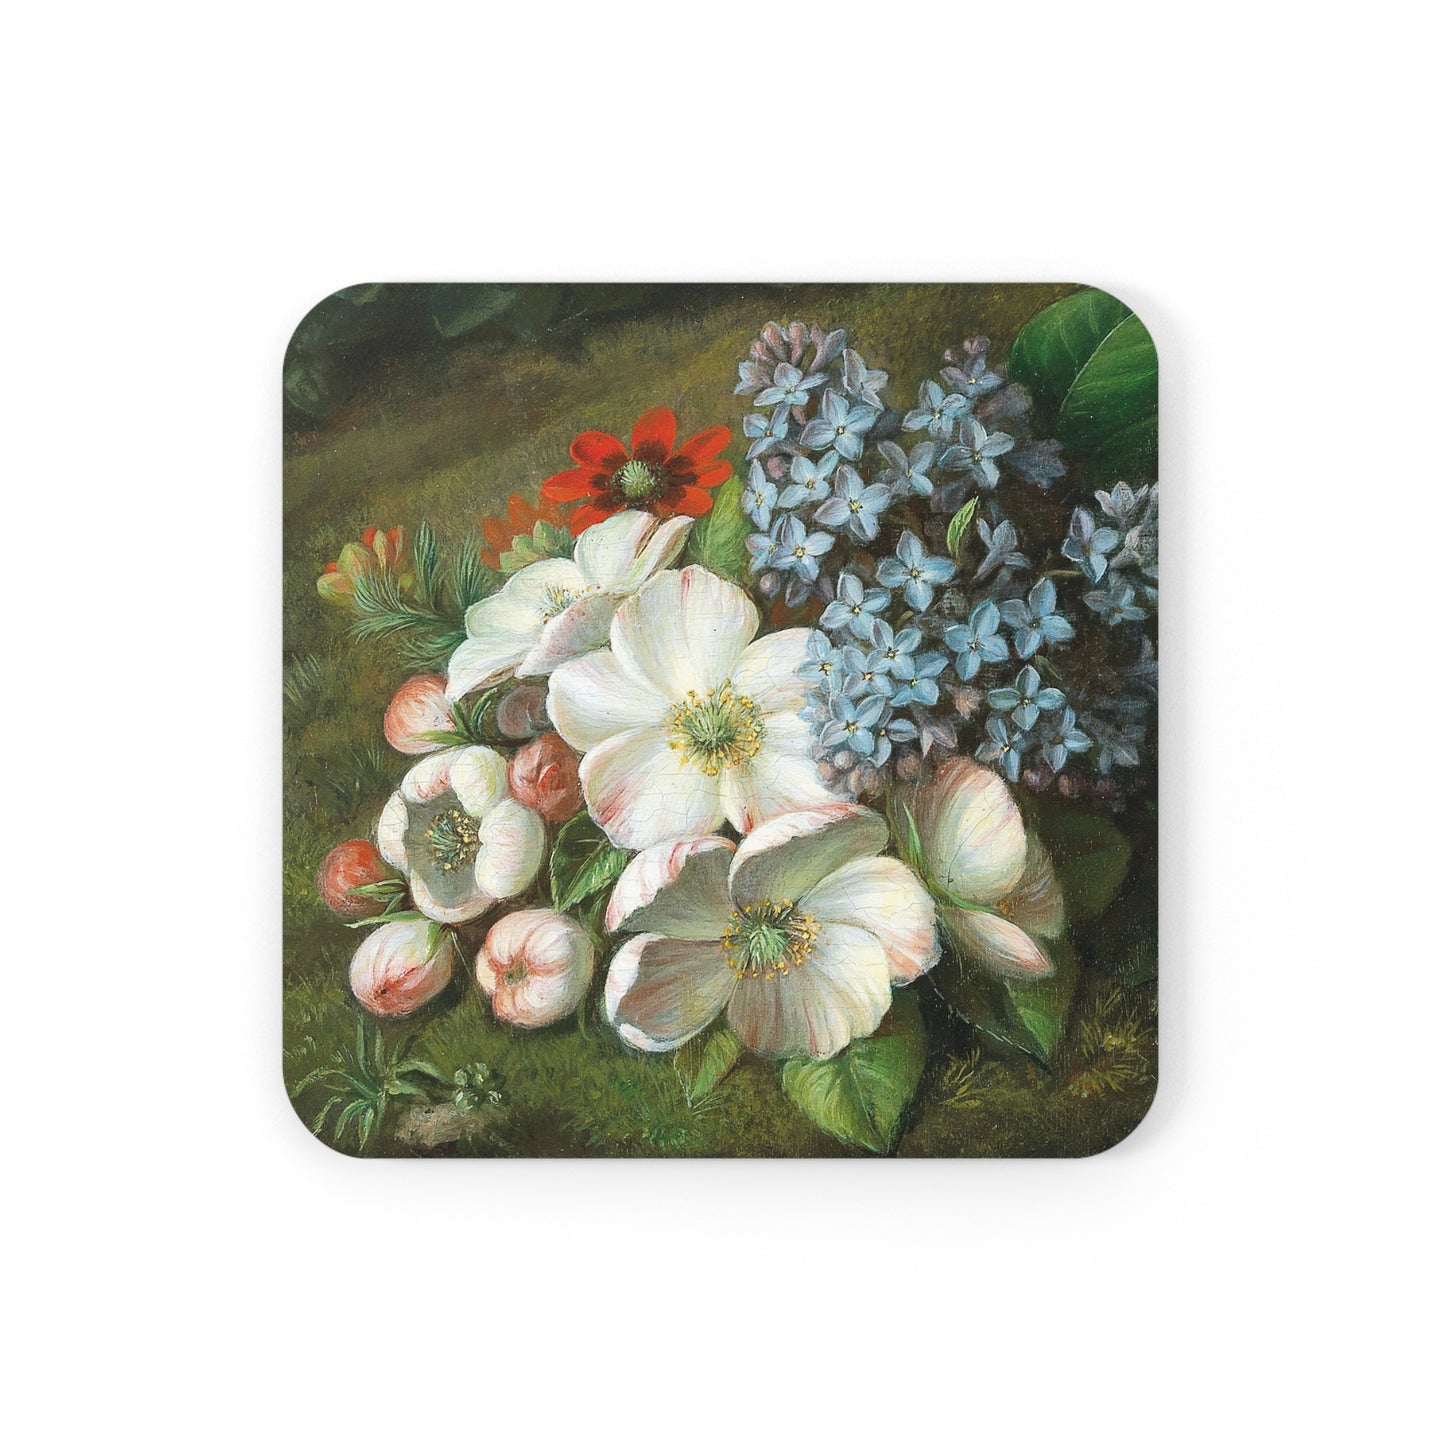 VINCENT LOOS - APPLE BLOSSOM WITH LILACS AND SUMMER ADONIS - COASTER SET